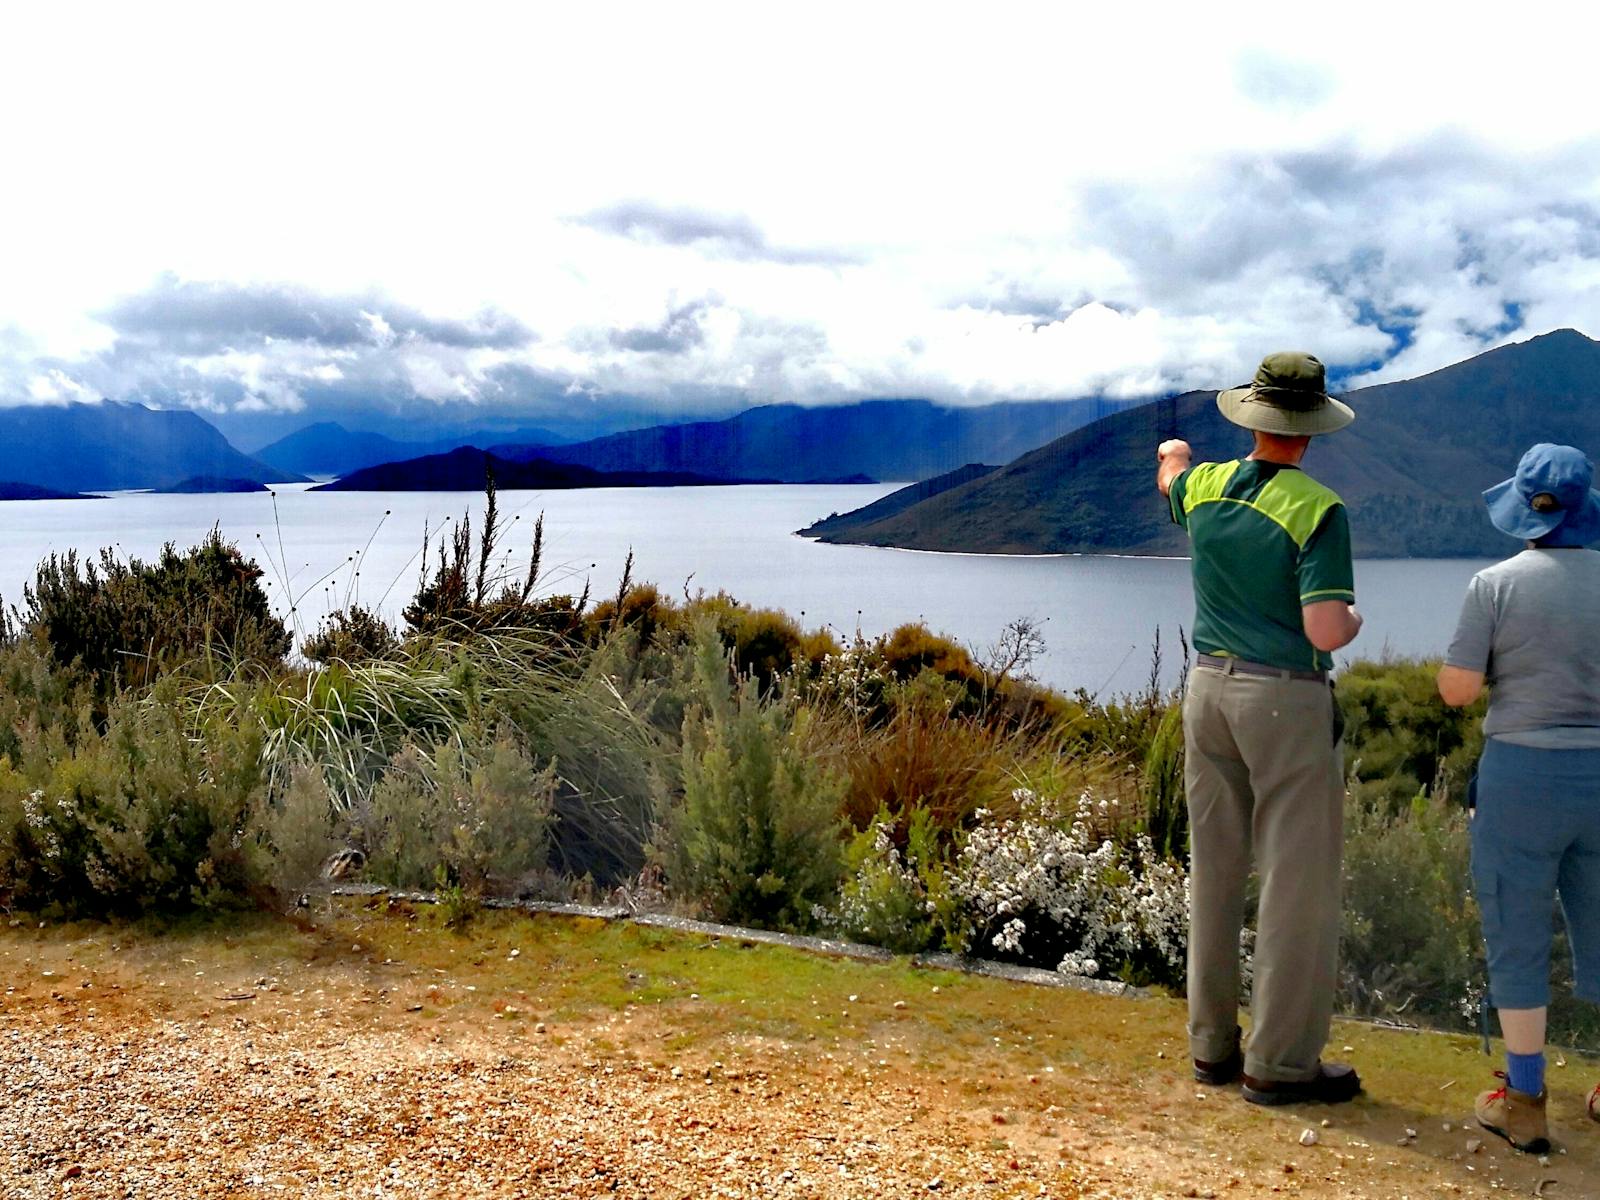 Guided views on the Lake Pedder & South West Wilderness Pack-Free Walk by Life's An Adventure